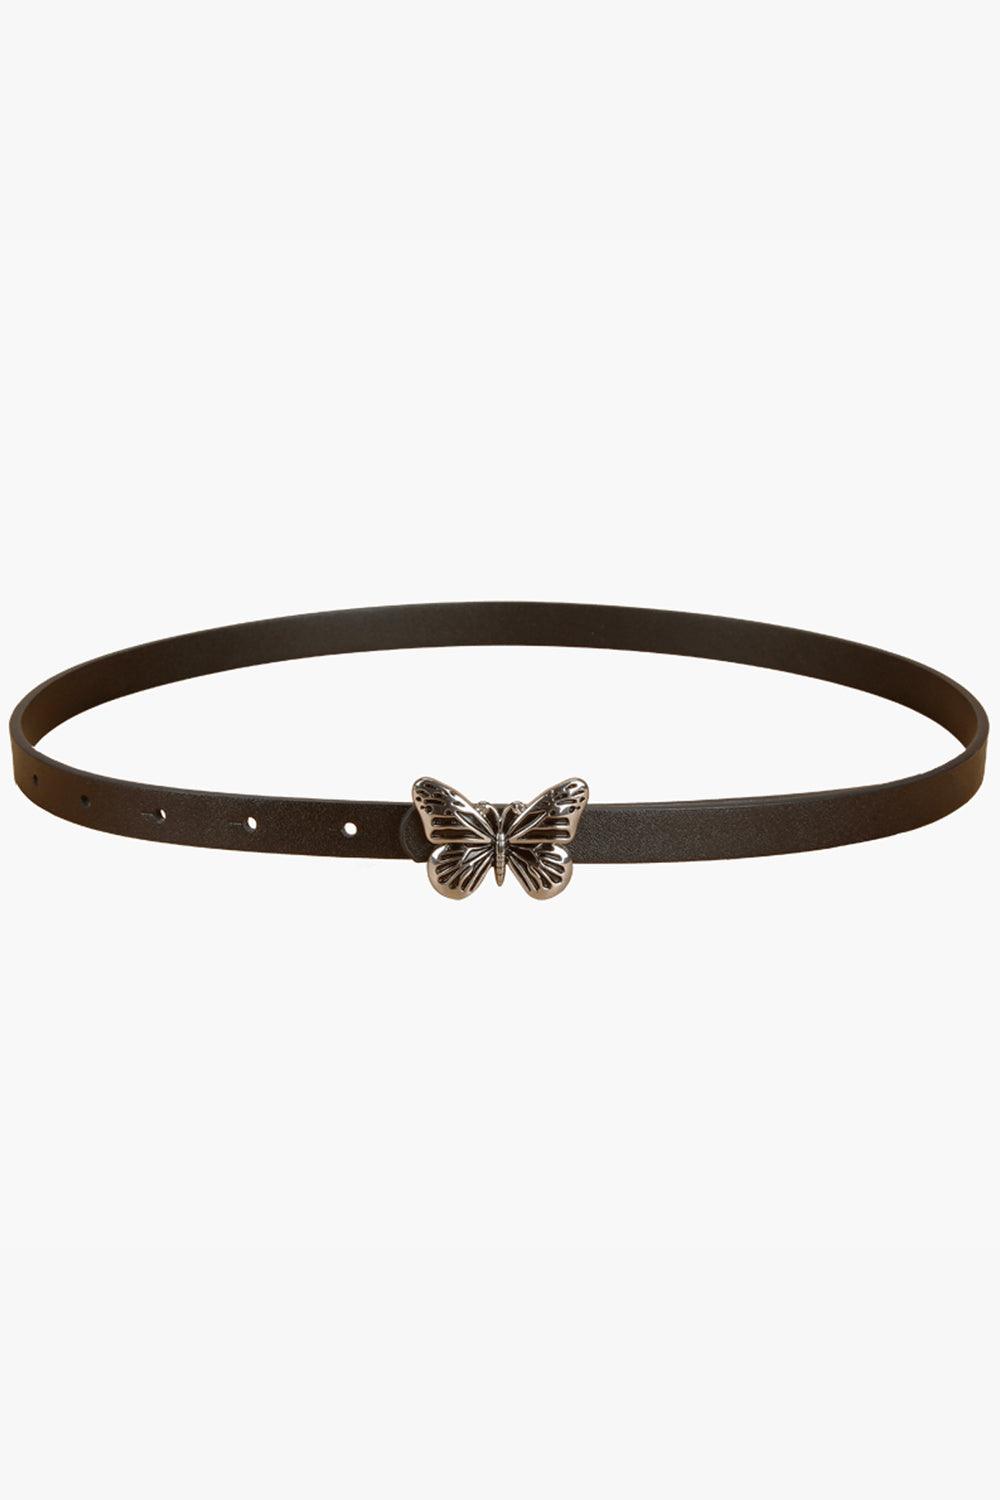 Butterfly Buckle Belt Artsy Aesthetic - Aesthetic Clothes Shop